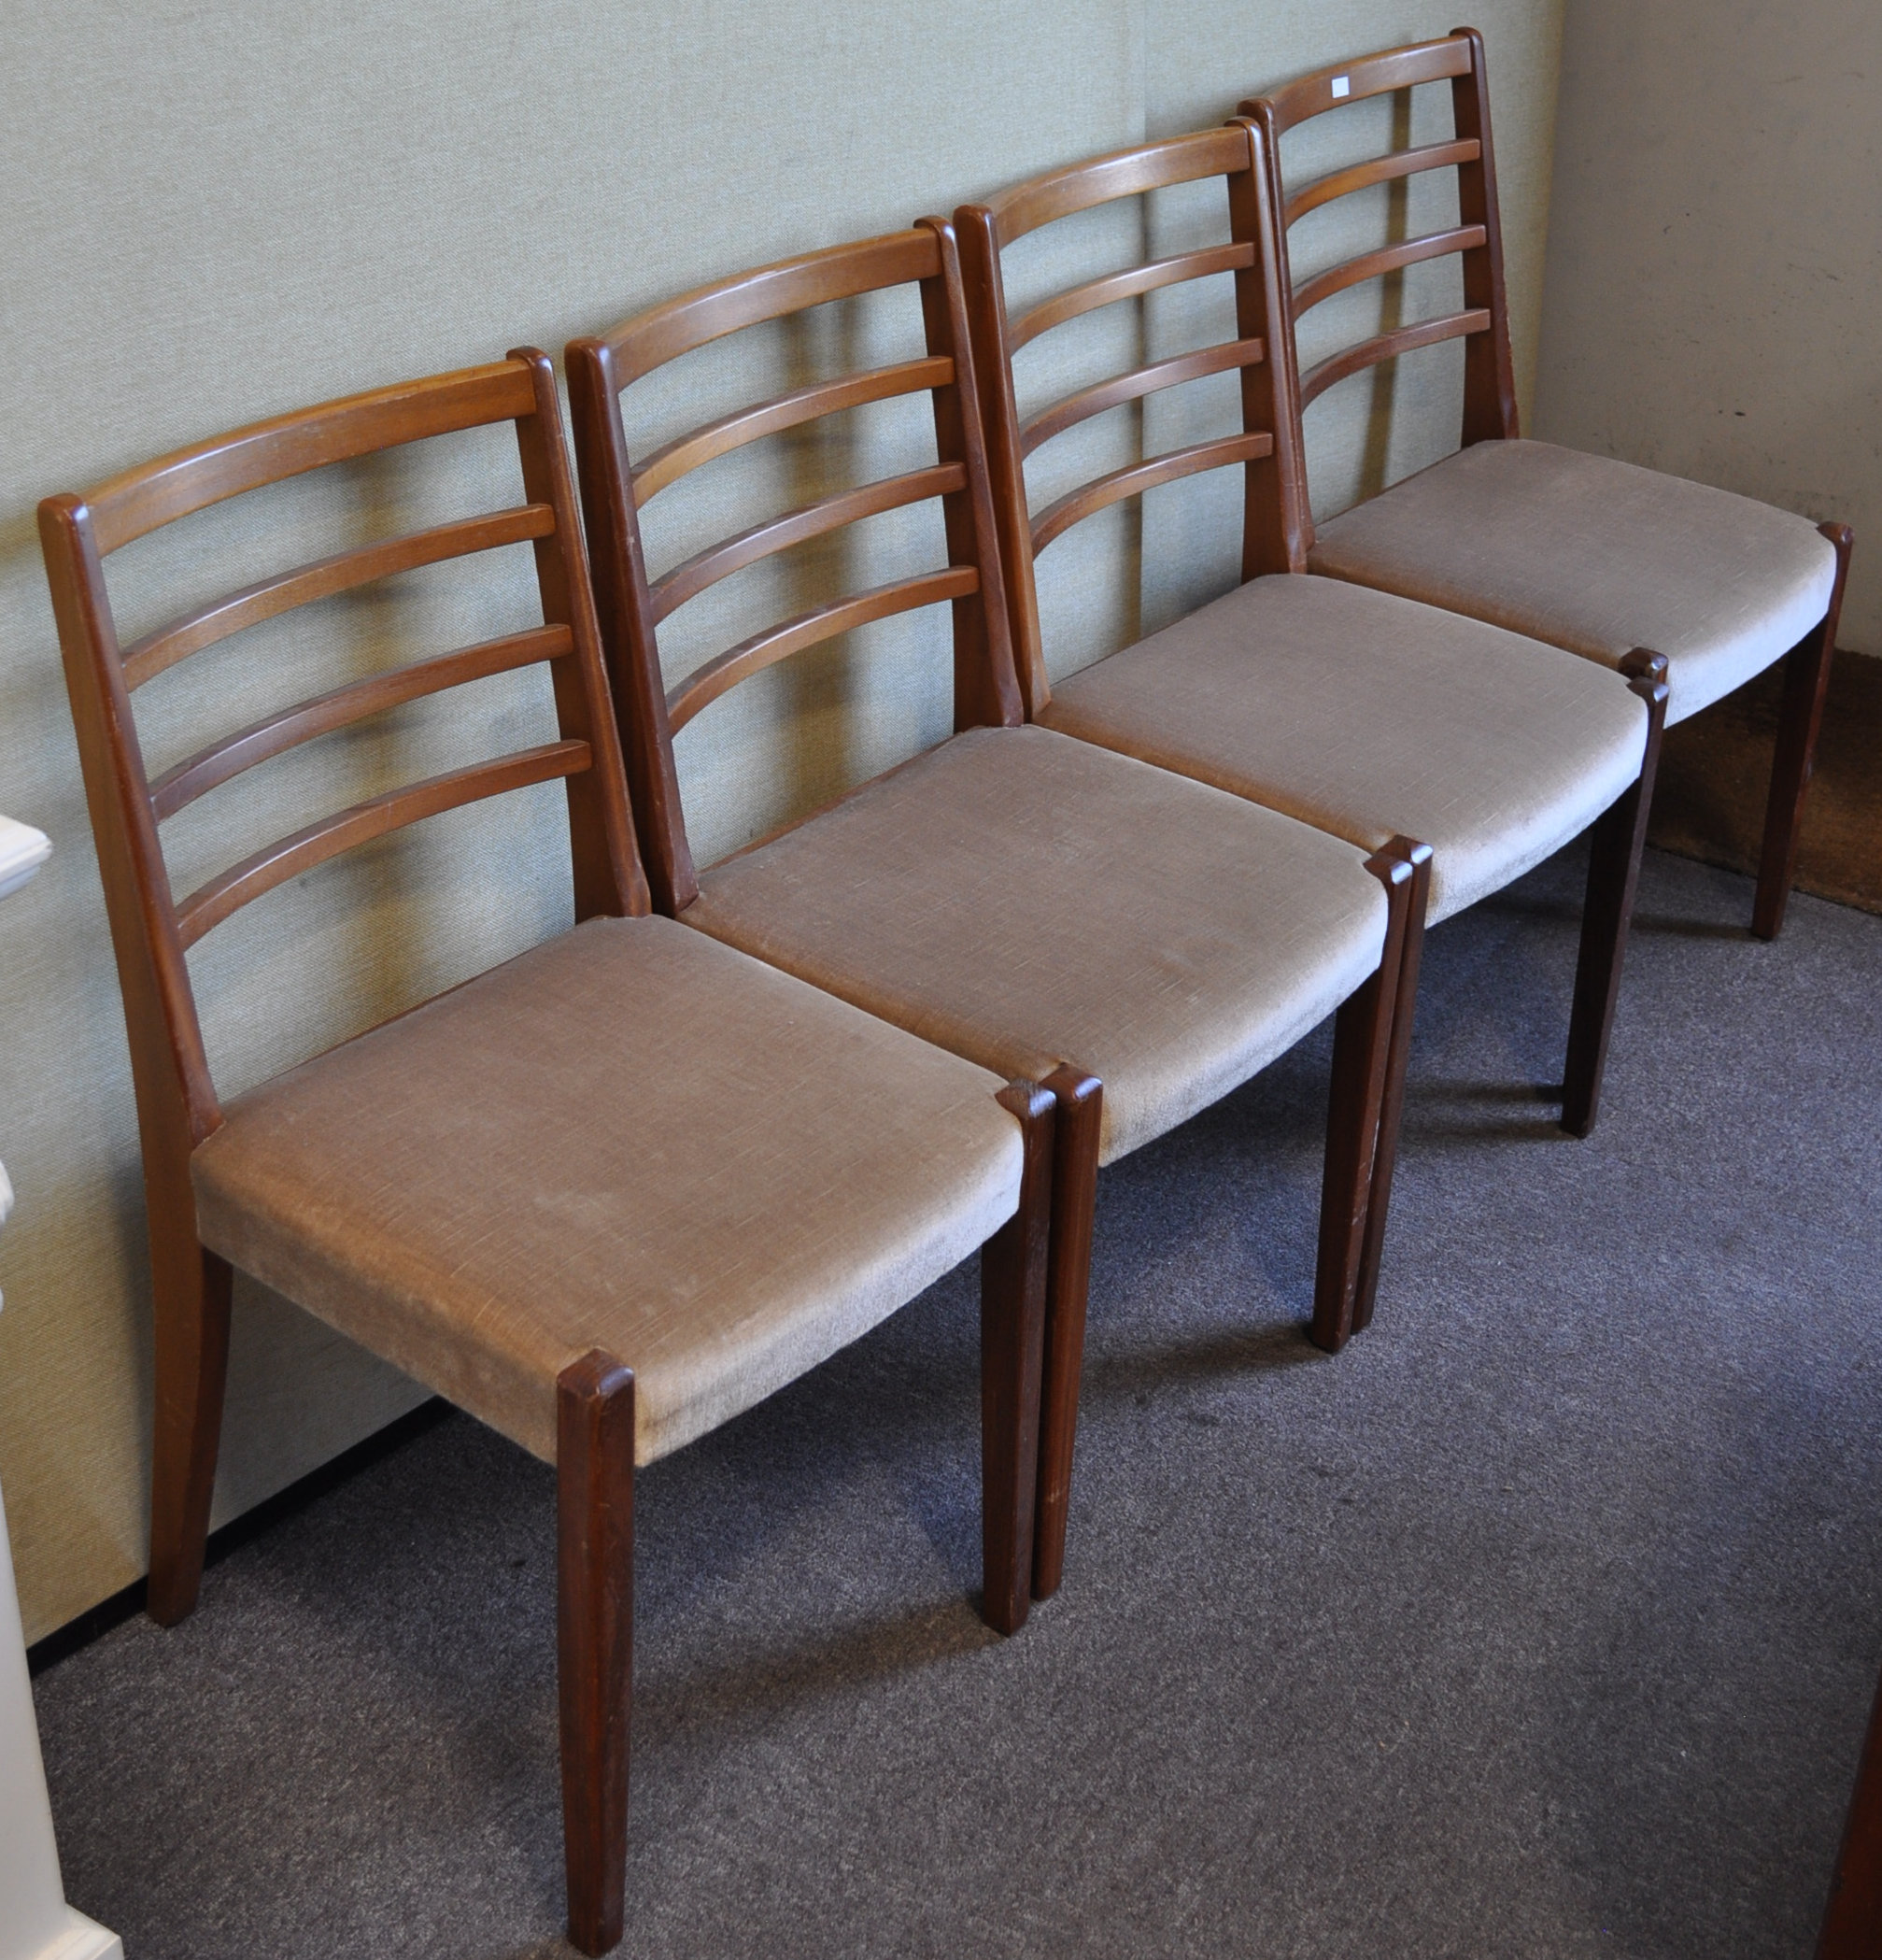 A set of four retro vintage teak wood dining chairs with ladder backs ,